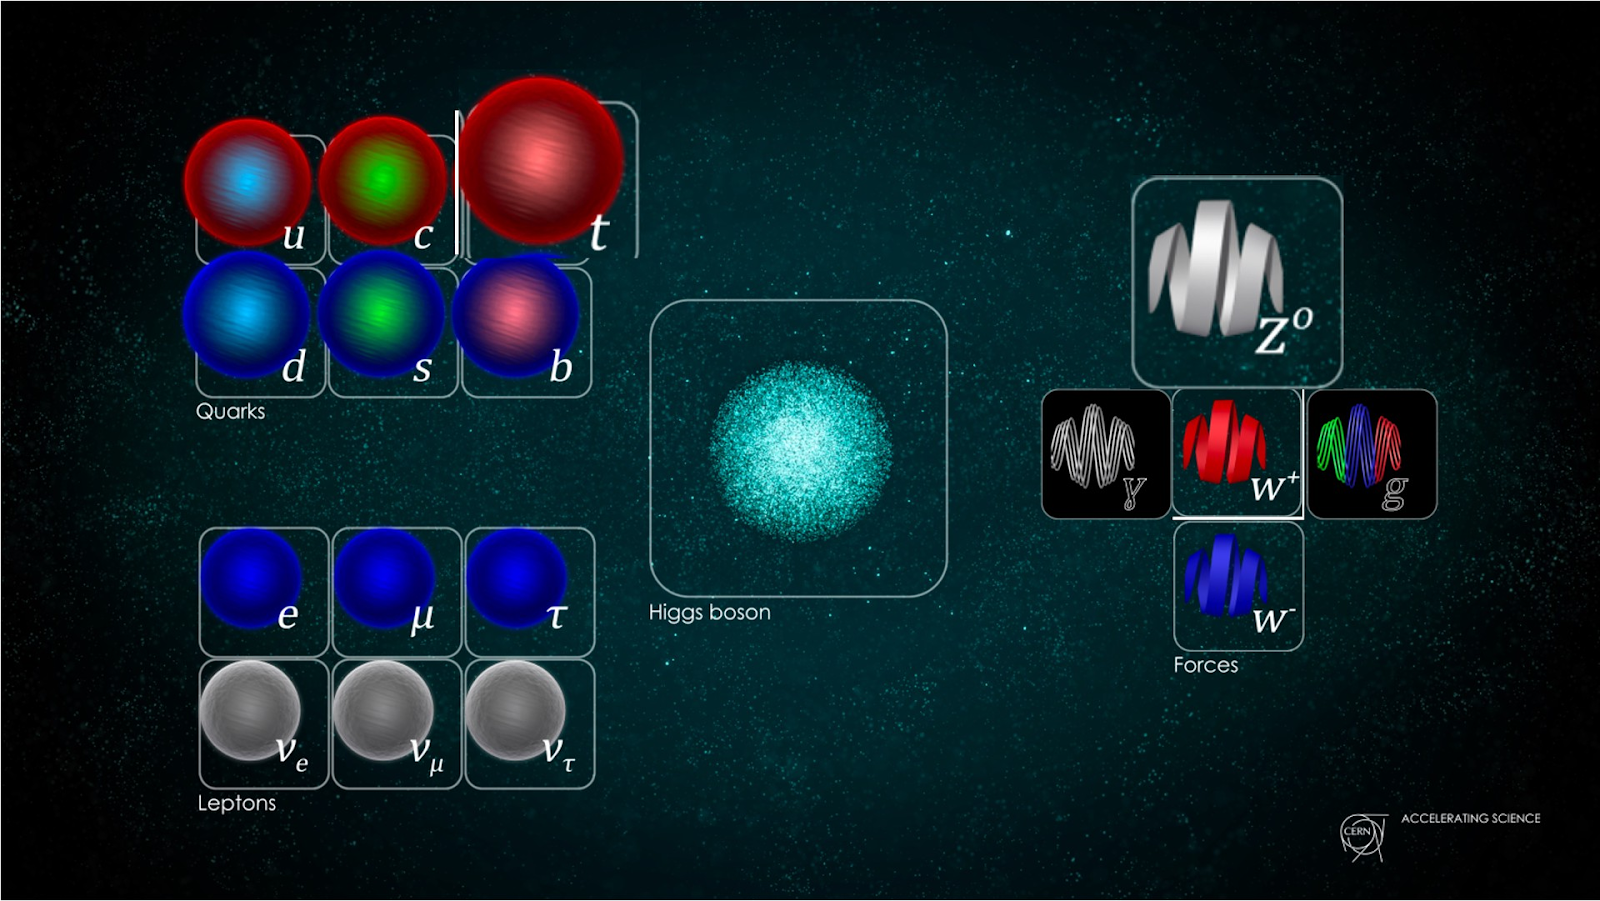 ​[Figure 2: The standard model of particle physics: the complete theory classifying all known elementary particles (quarks, leptons, and bosons) and describing fundamental forces (the electromagnetic, weak, and strong interactions). In particular, the strong interaction uniquely predicts that quarks and gluons, even at the world’s most powerful hadron colliders, are confined inside composite particles. In an environment of extremely high temperature and energy density, like the one formed when colliding high-energy heavy nuclei, quarks and gluons instead appear to become “free” in the quark-gluon plasma. Signatures of QGP can be studied with Z bosons and top quarks, here emphasized for their relevance in the “Quarks to Cosmos” project. Image credits: CERN (modified by L. Alcerro).]